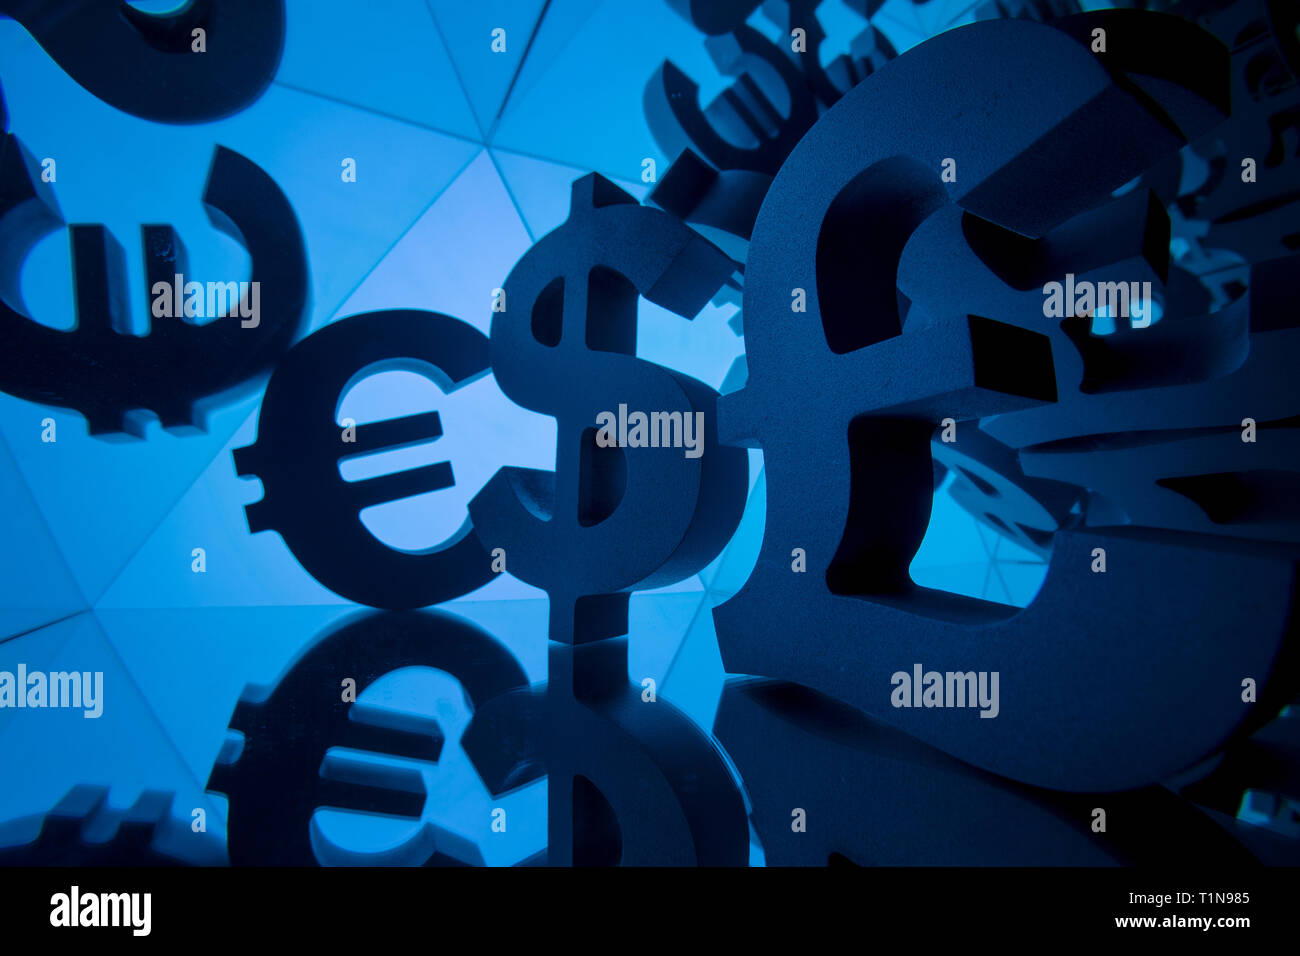 Euro, Pound and Dollar Currency Symbol With Many Mirroring Images of Itself on Blue Background Stock Photo